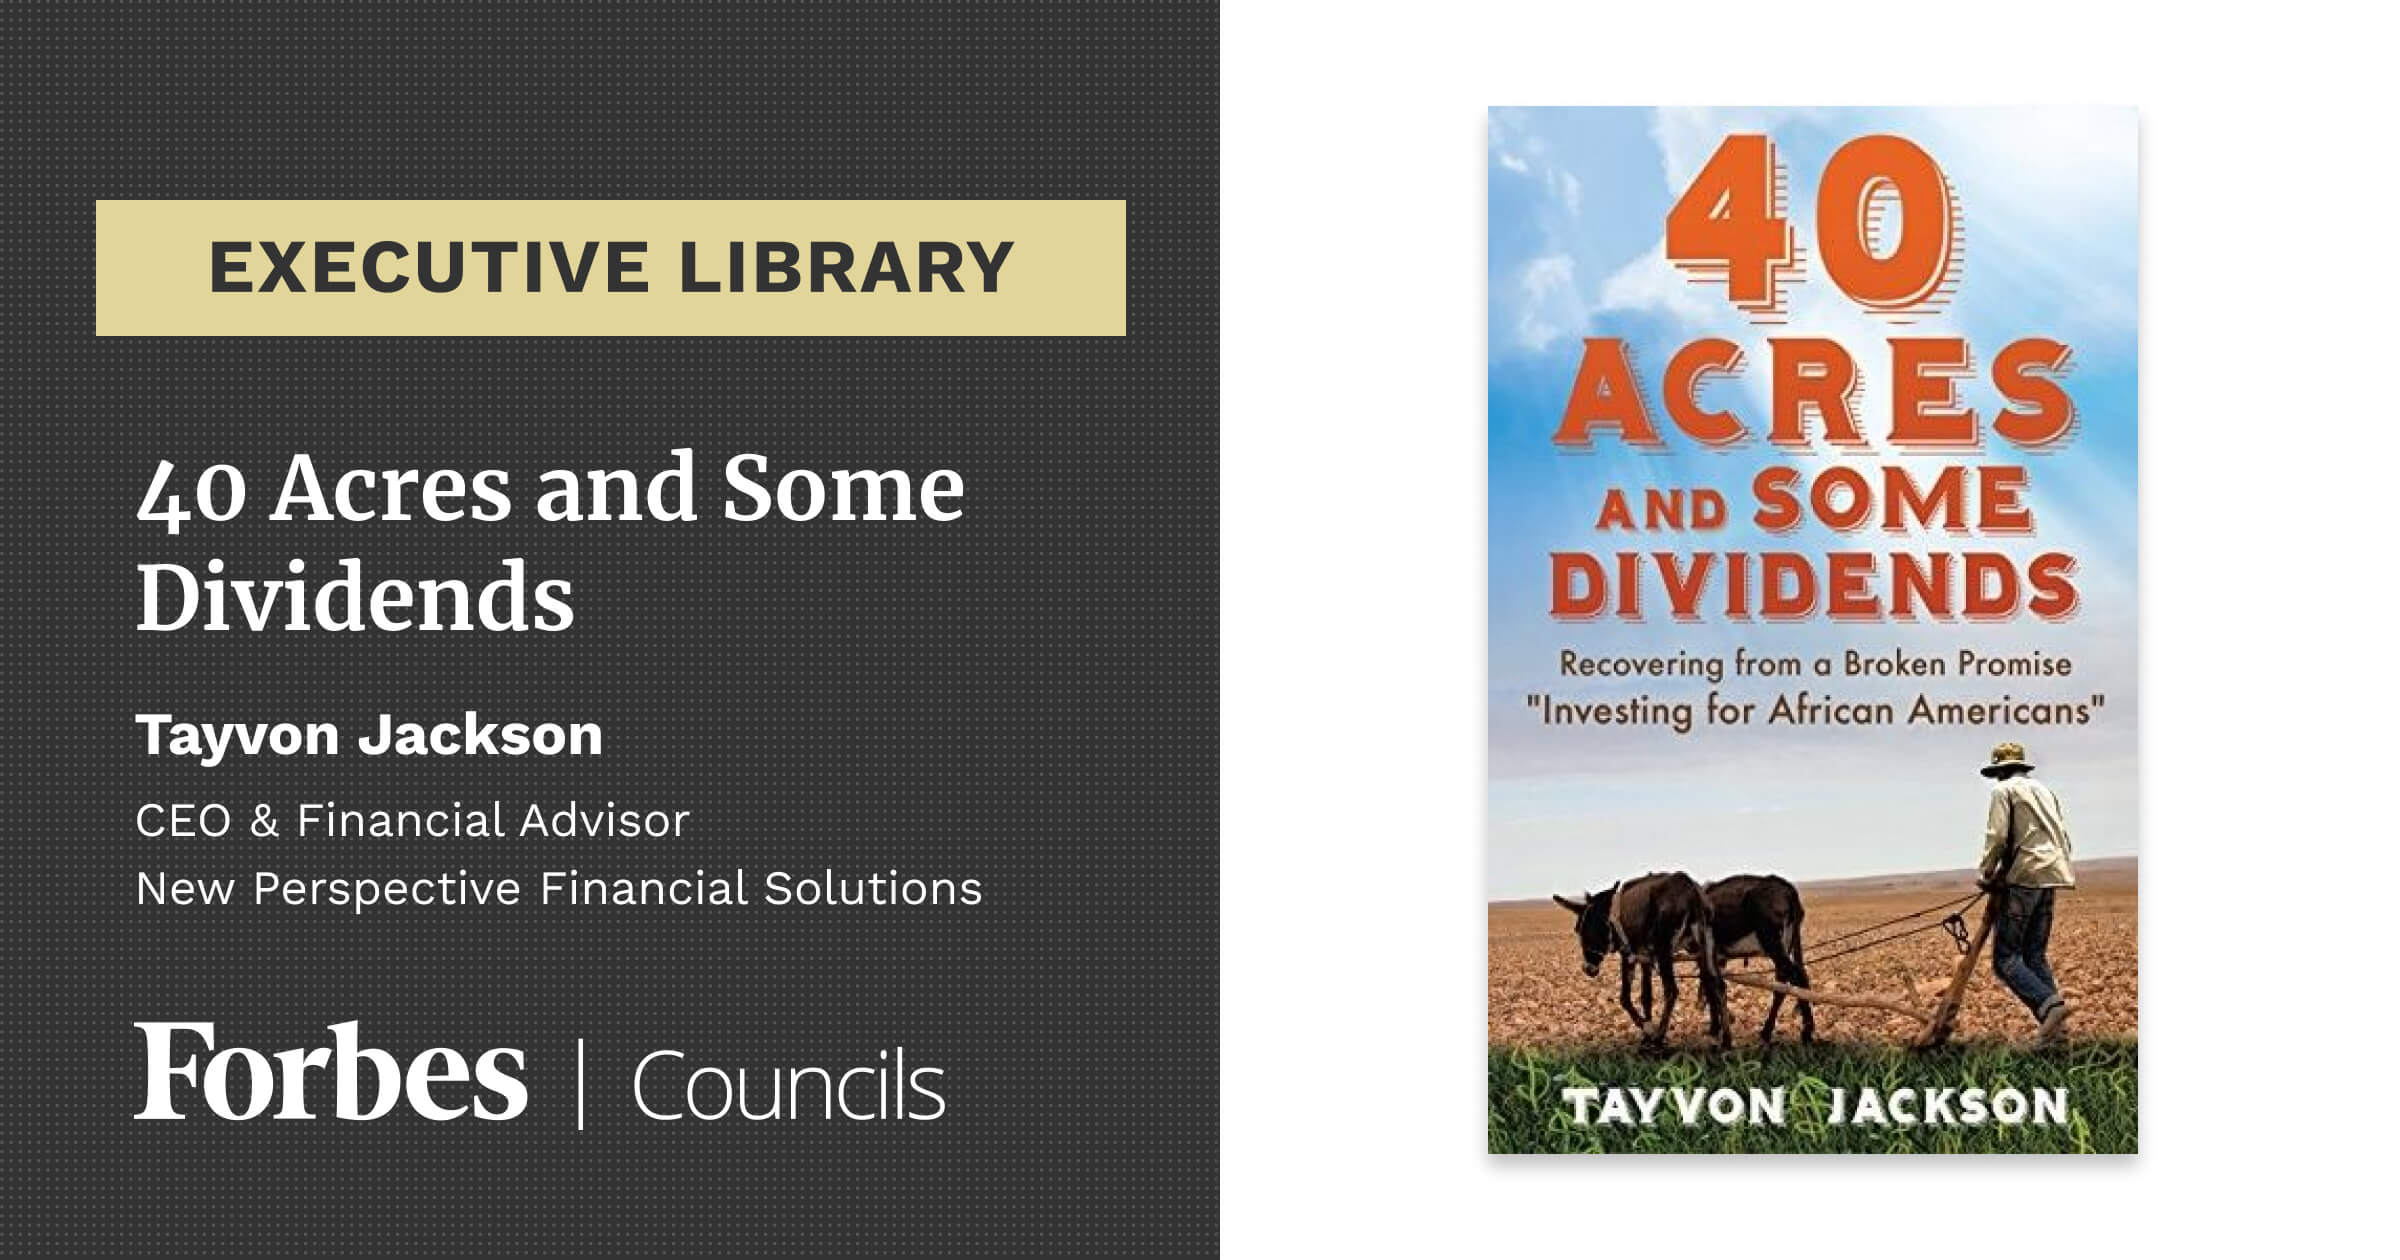 40 Acres and Some Dividends by Tayvon Jackson